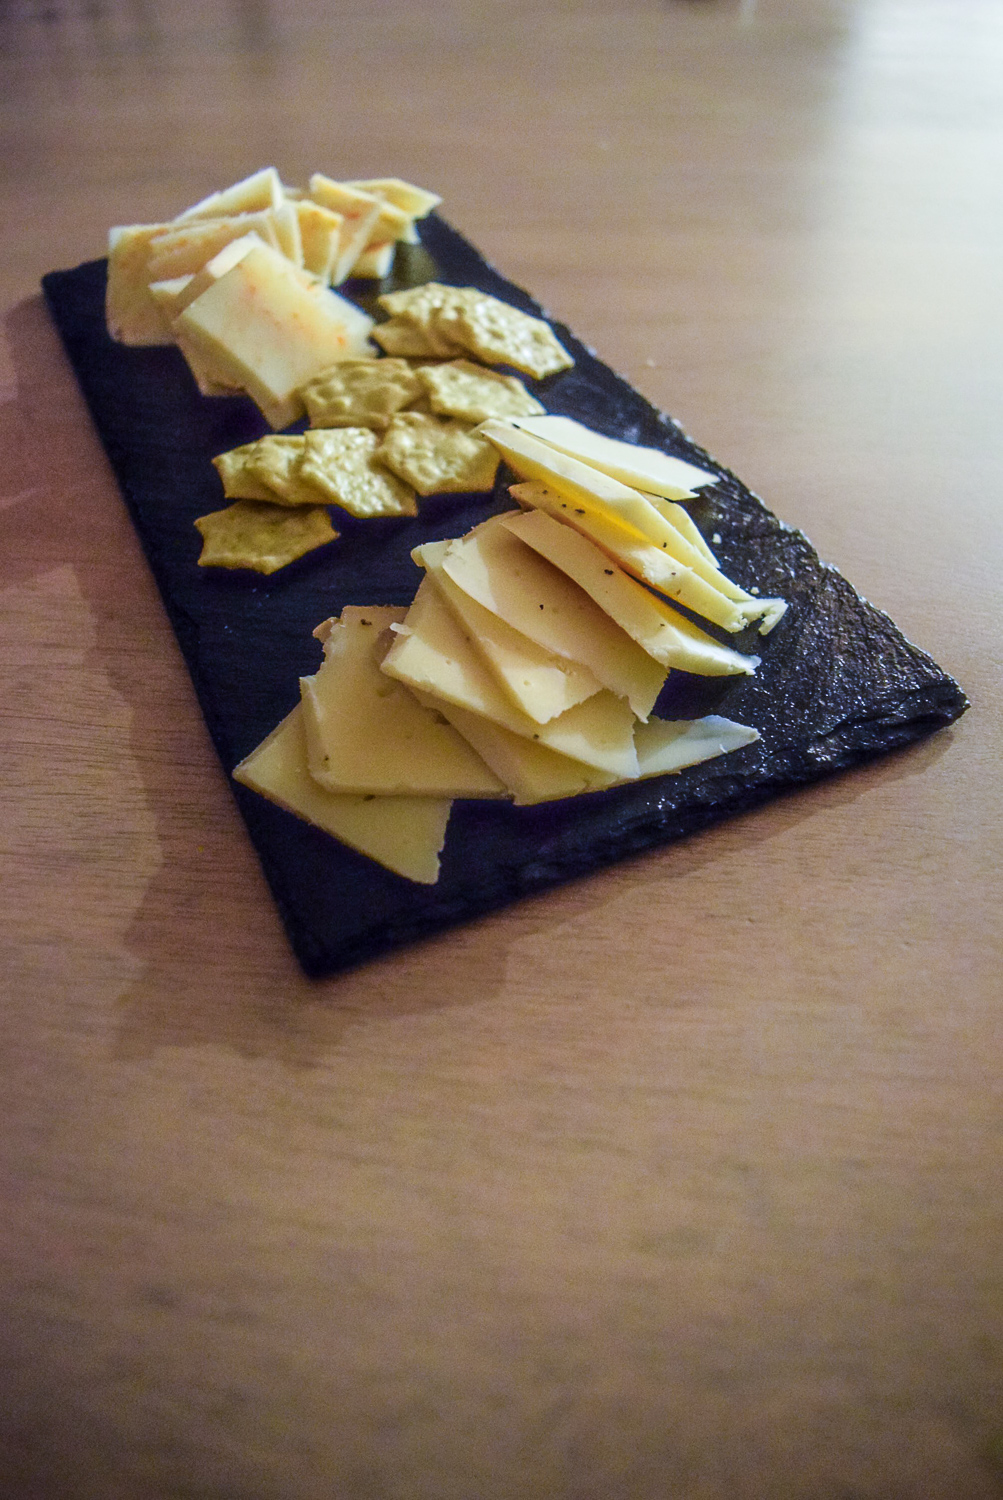 Front view of Gluten-Free Peppery Slate Cheeseboard with Trader Joe's Gluten-Free Savory Thin Mini Edamame Crackers